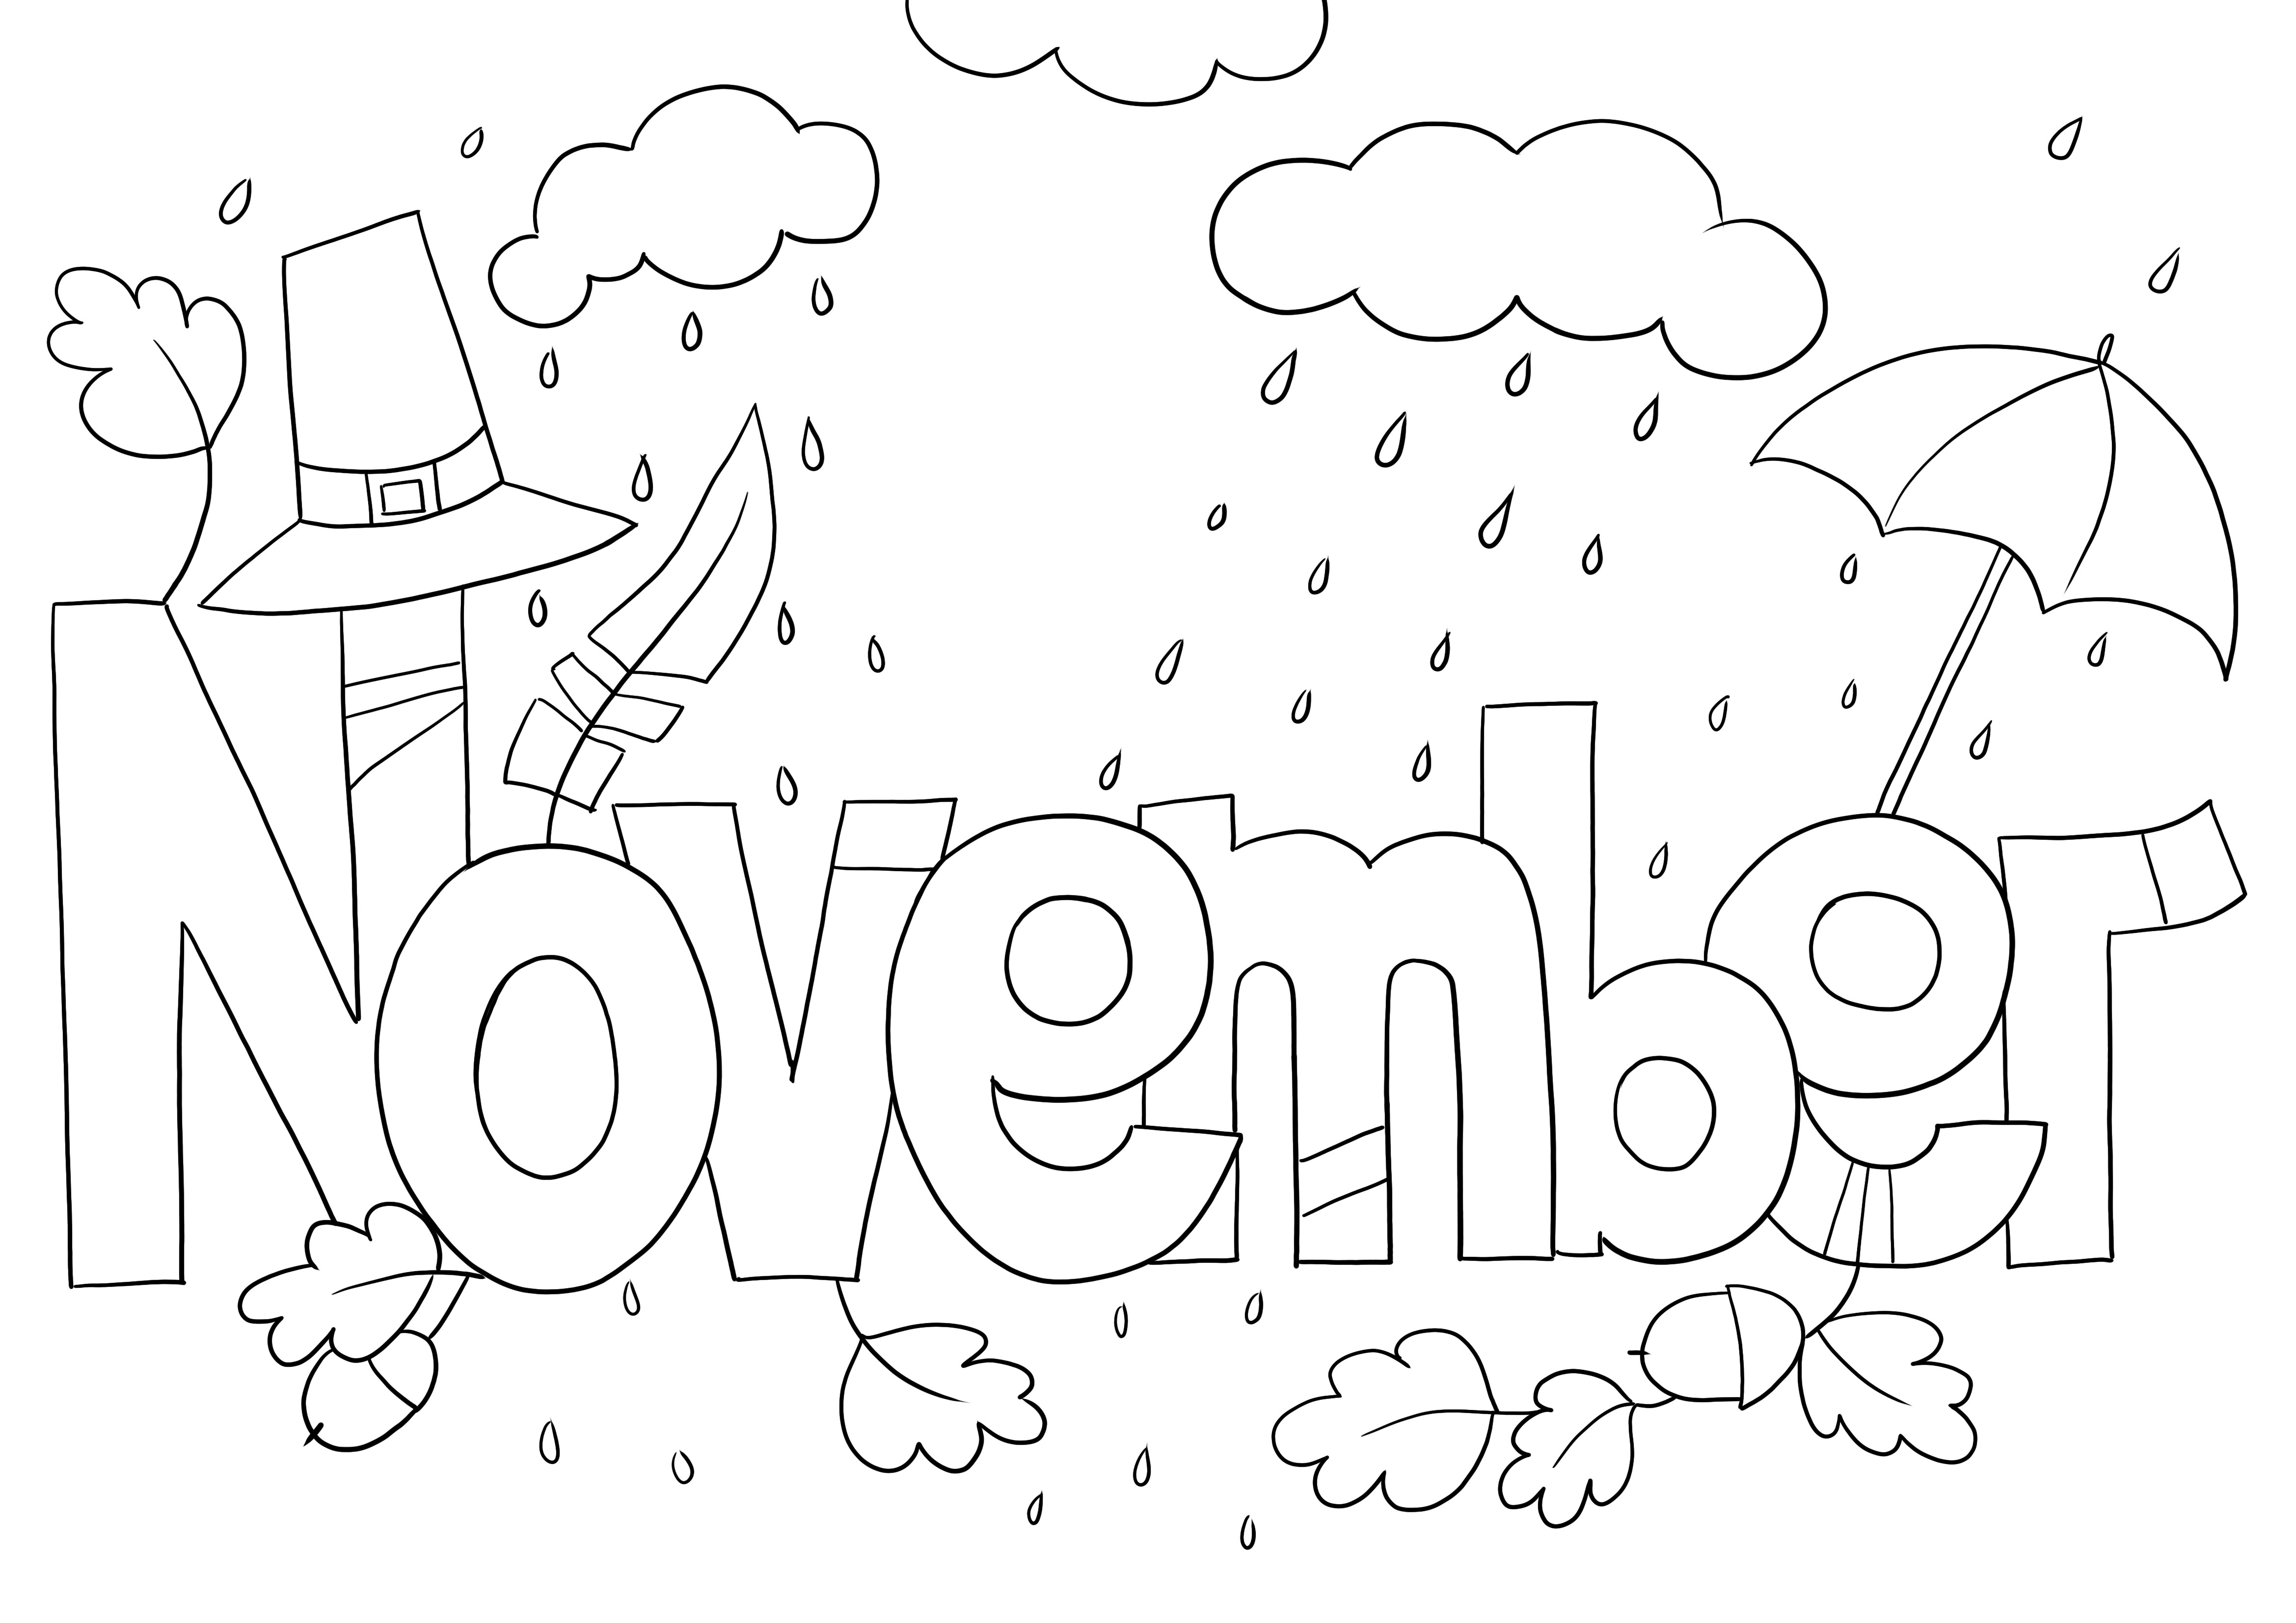 November month for free downloading and easy coloring